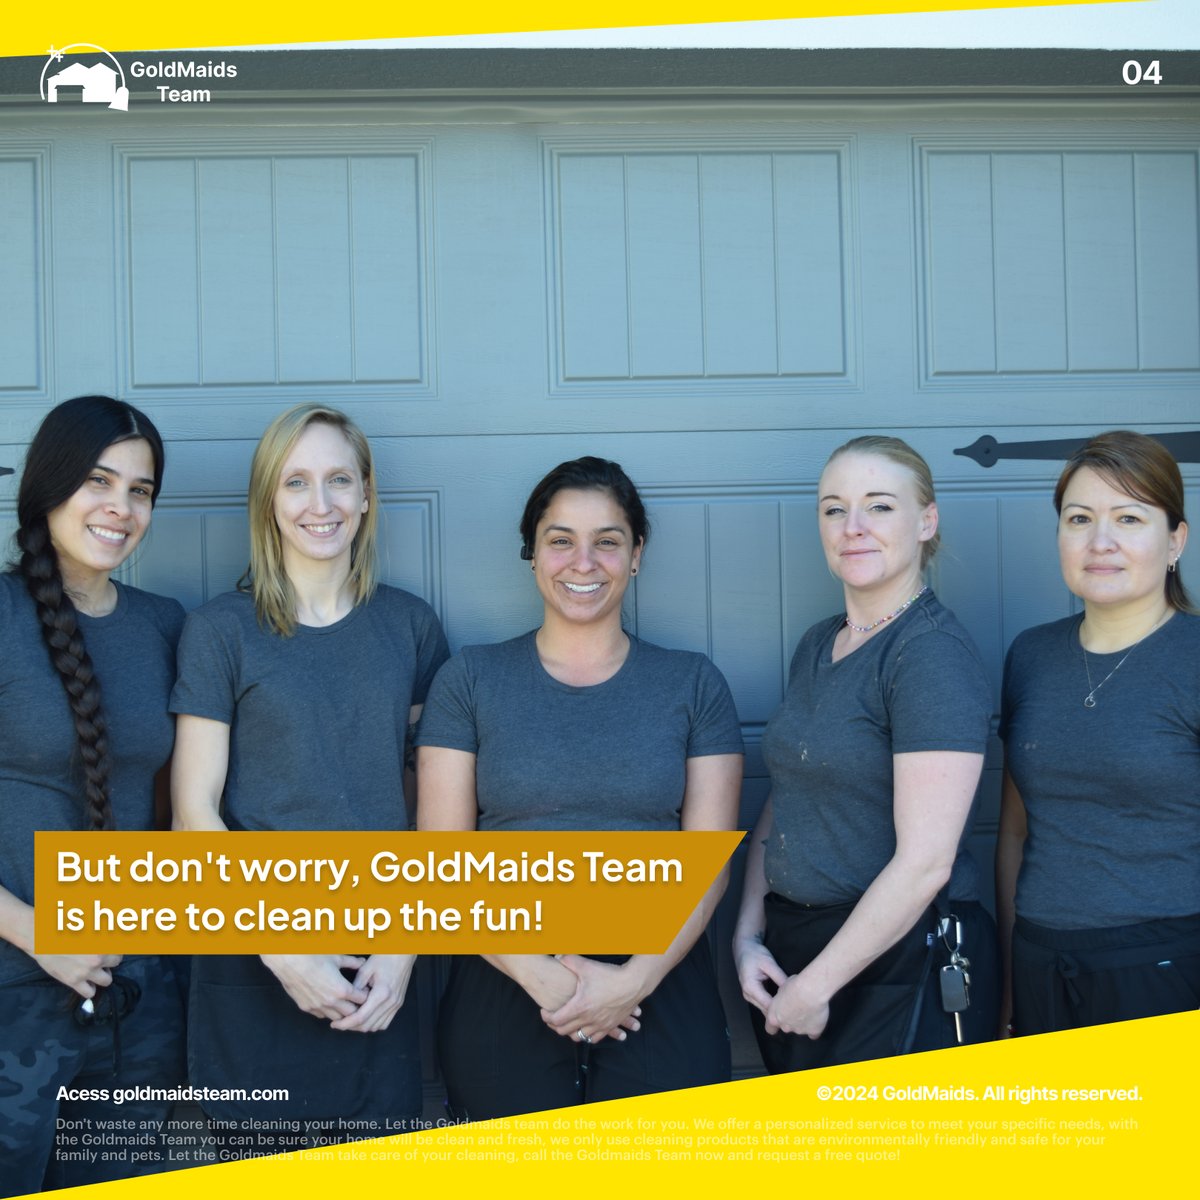 The GoldMaids Team offers professional cleaning services so you can focus on enjoying every moment.✨
#cleaning #clean #maids #care #housecleaning #cleaningservice #maidservice #housecleaningservice #carpetcleaning #professionalcleaners